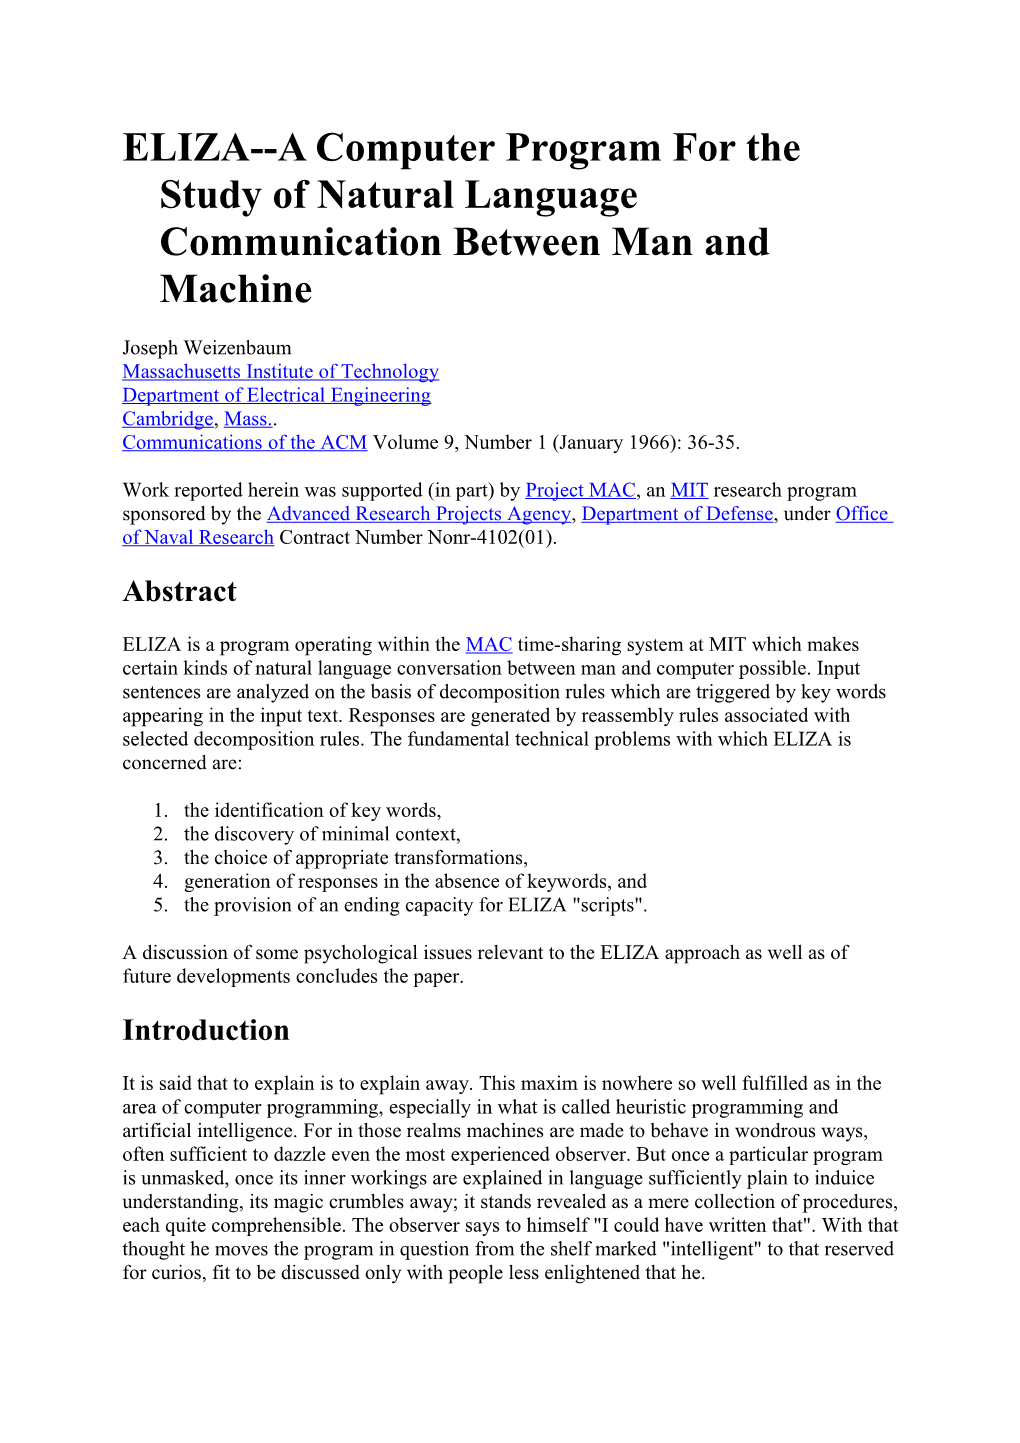 ELIZA a Computer Program for the Study of Natural Language Communication Between Man and Machine